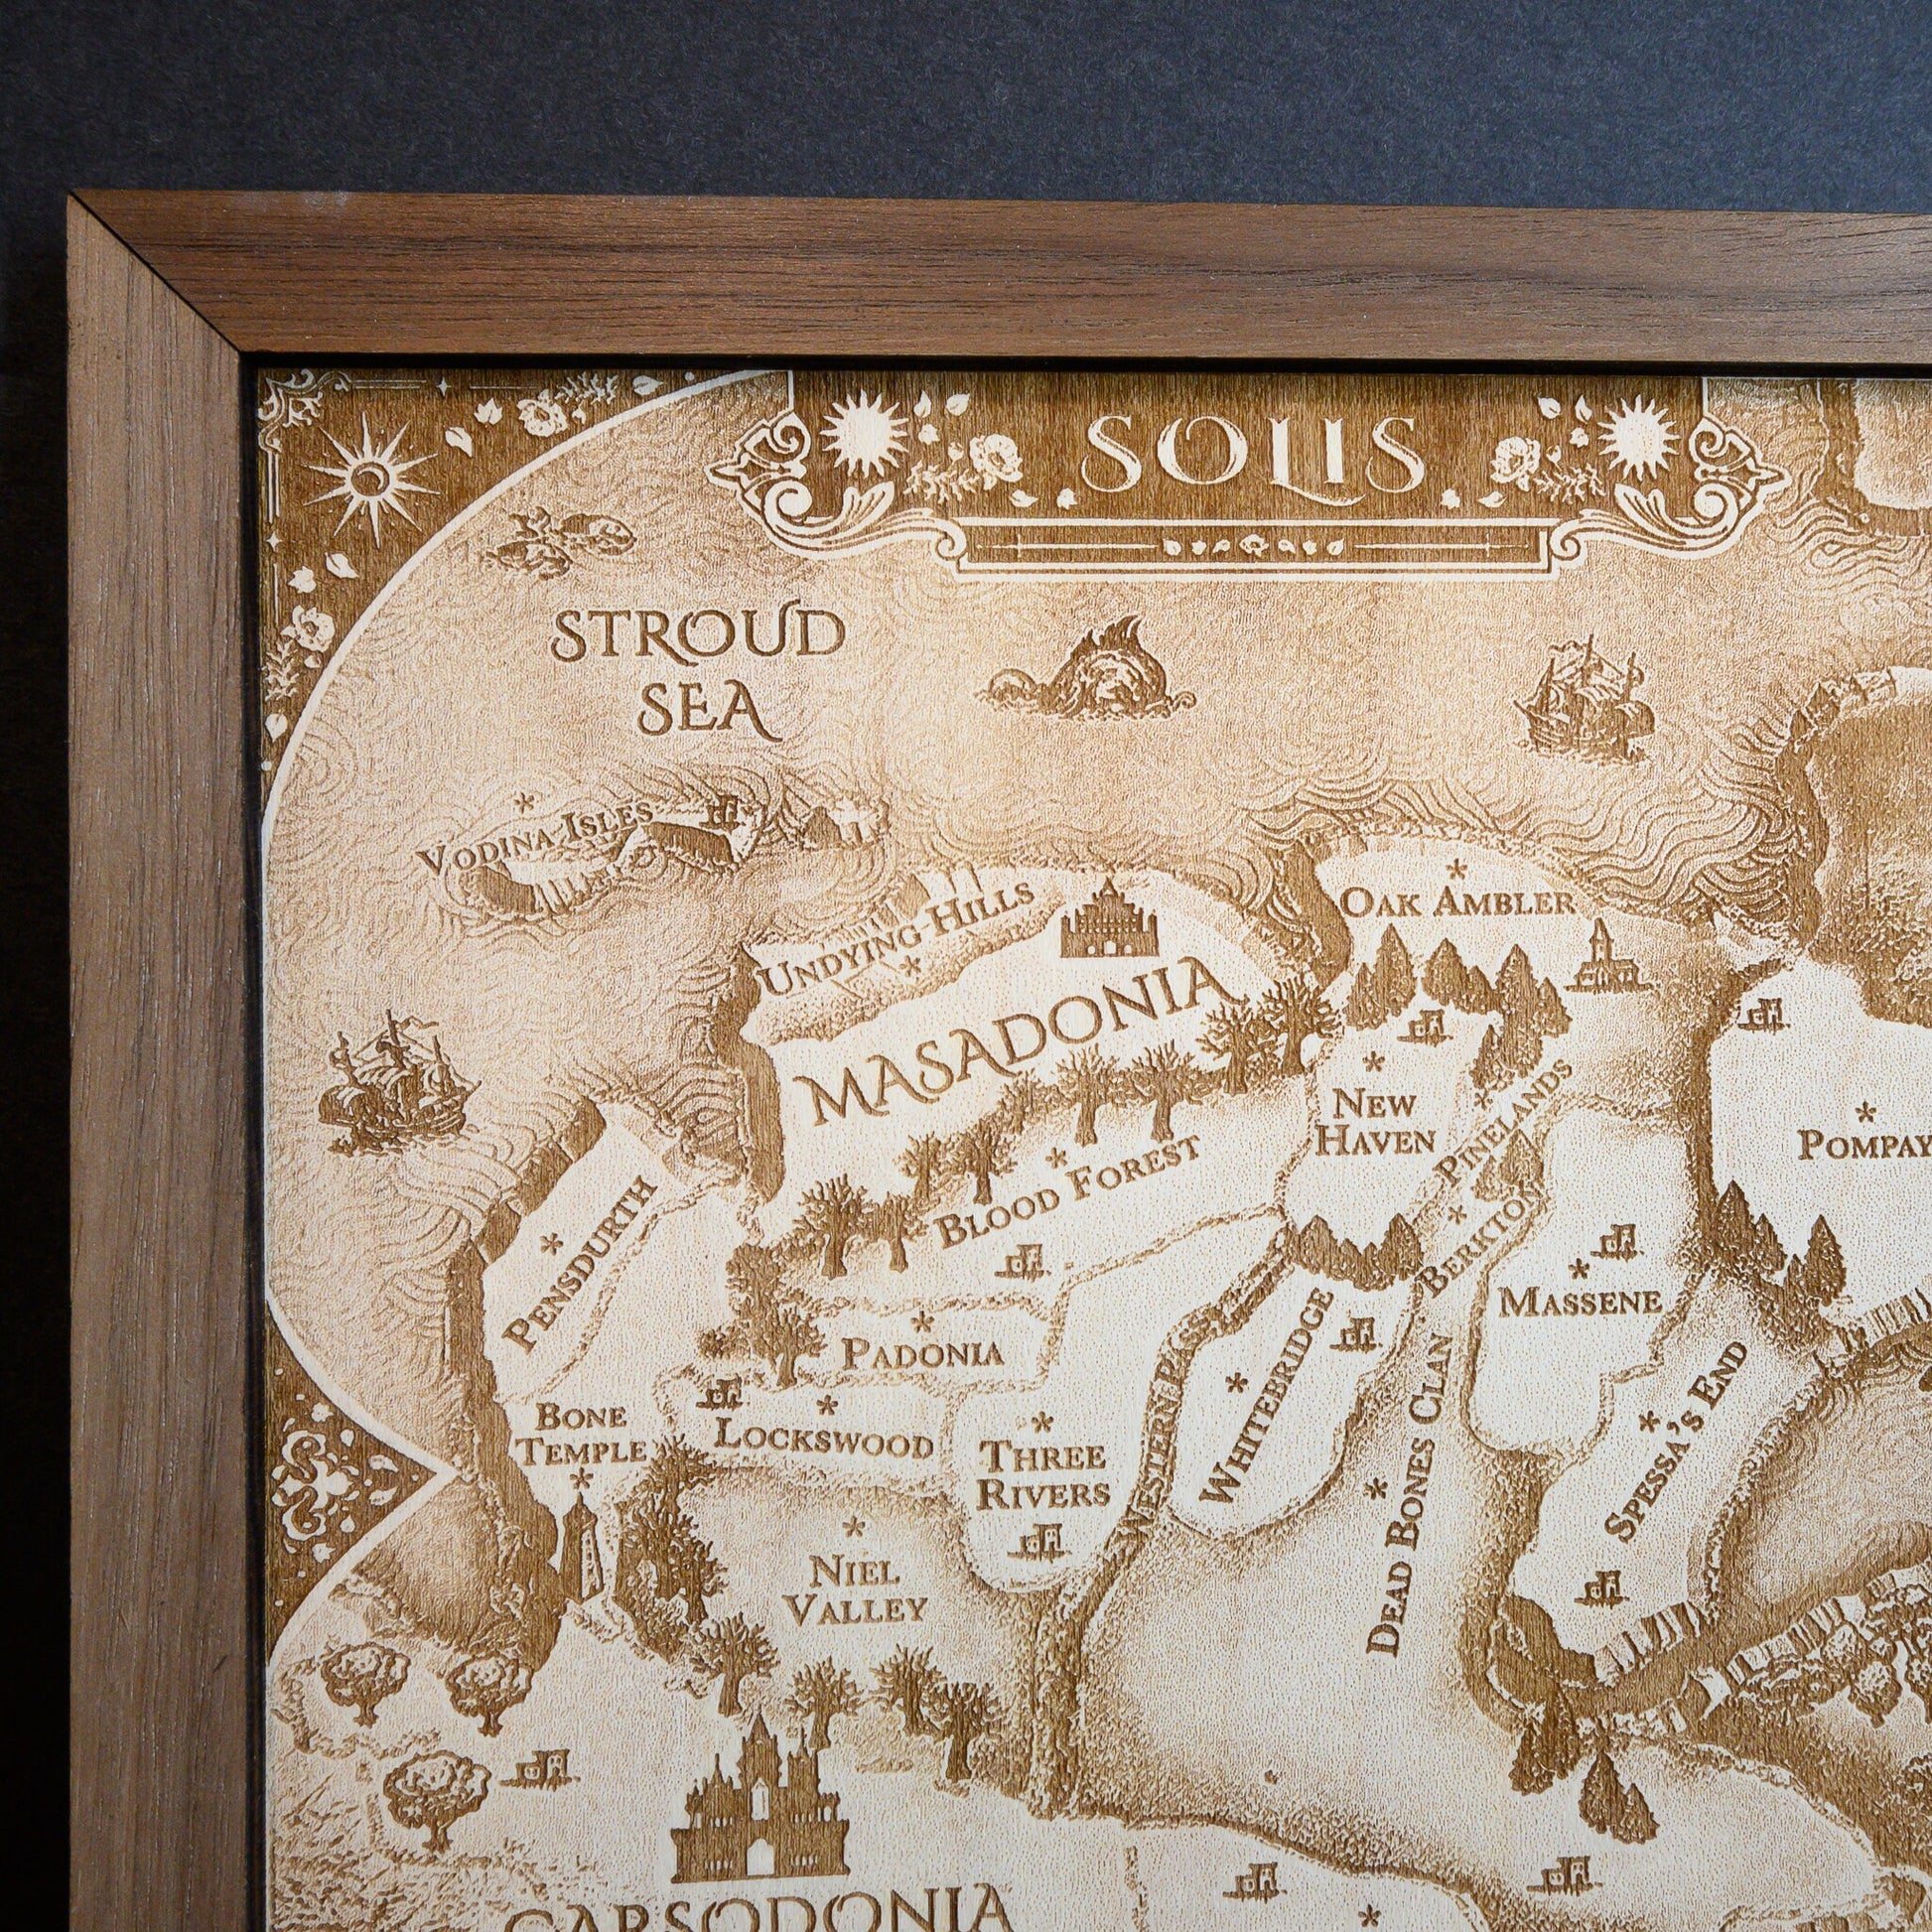 From Blood and Ash Map, Wood Engraved Map of Solis and Atlantia